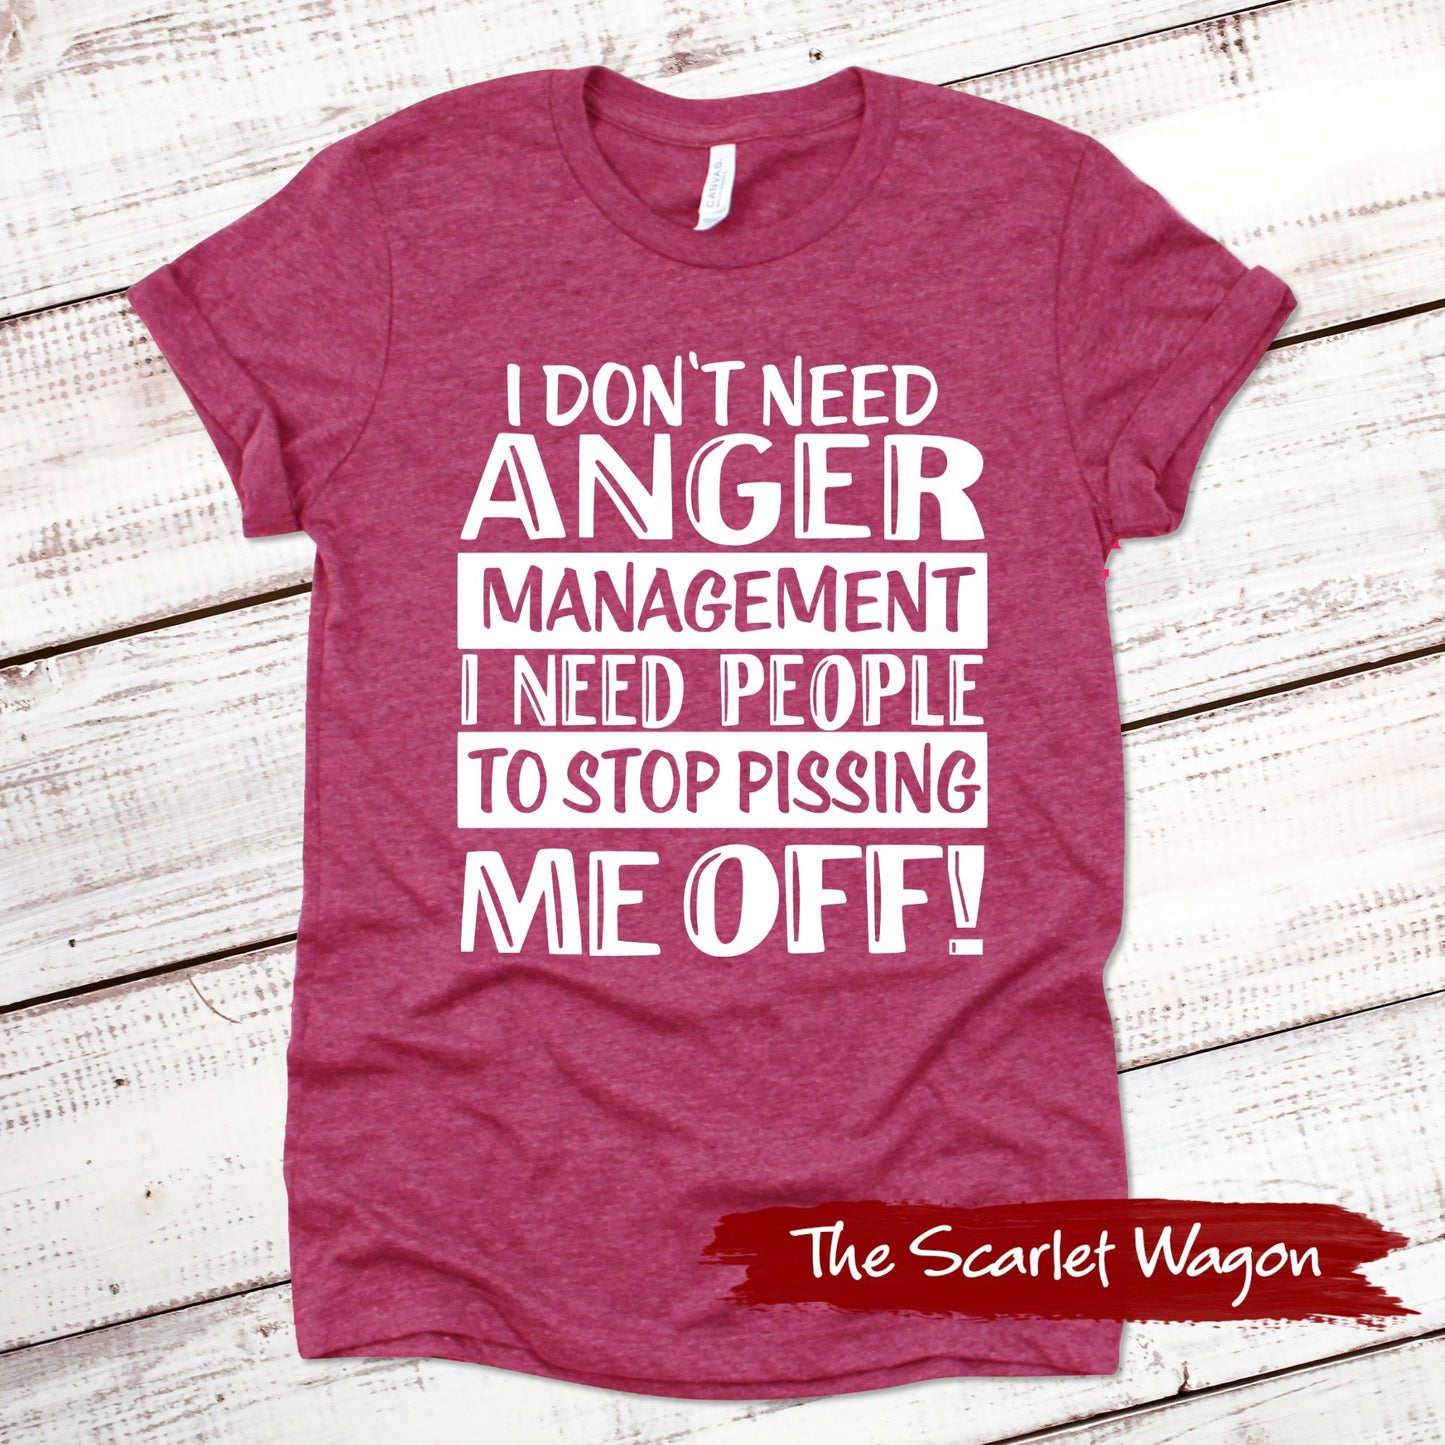 I Don't Need Anger Management Funny Shirt Scarlet Wagon Heather Raspberry XS 